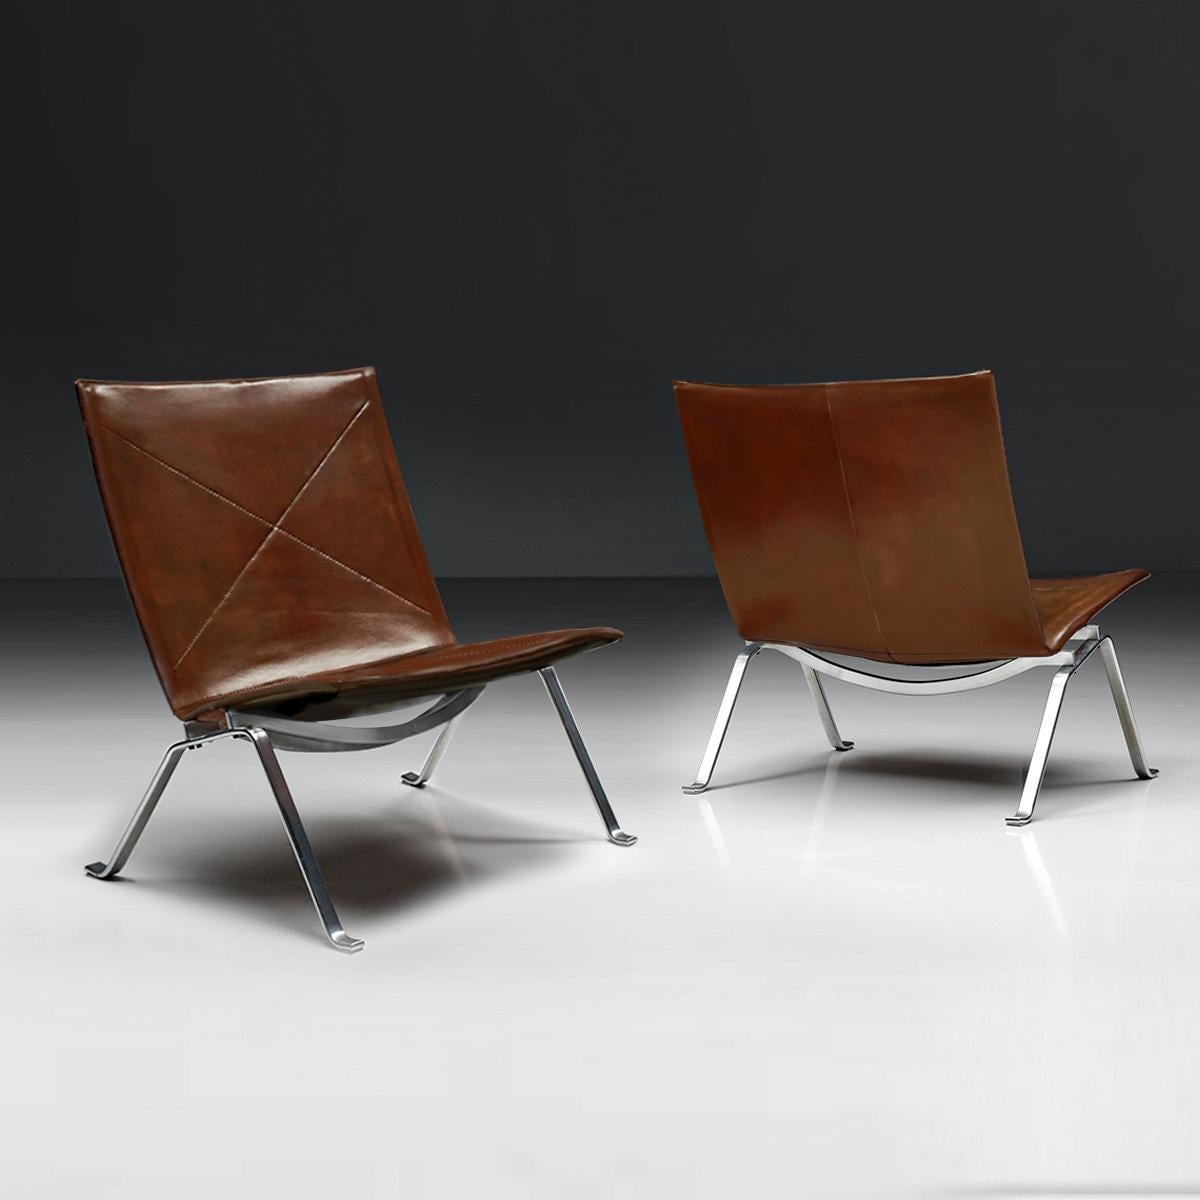 Mid-20th Century Pair of Poul Kjaerholm, E. Kold Christensen Steel and Leather PK22 Lounge Chairs